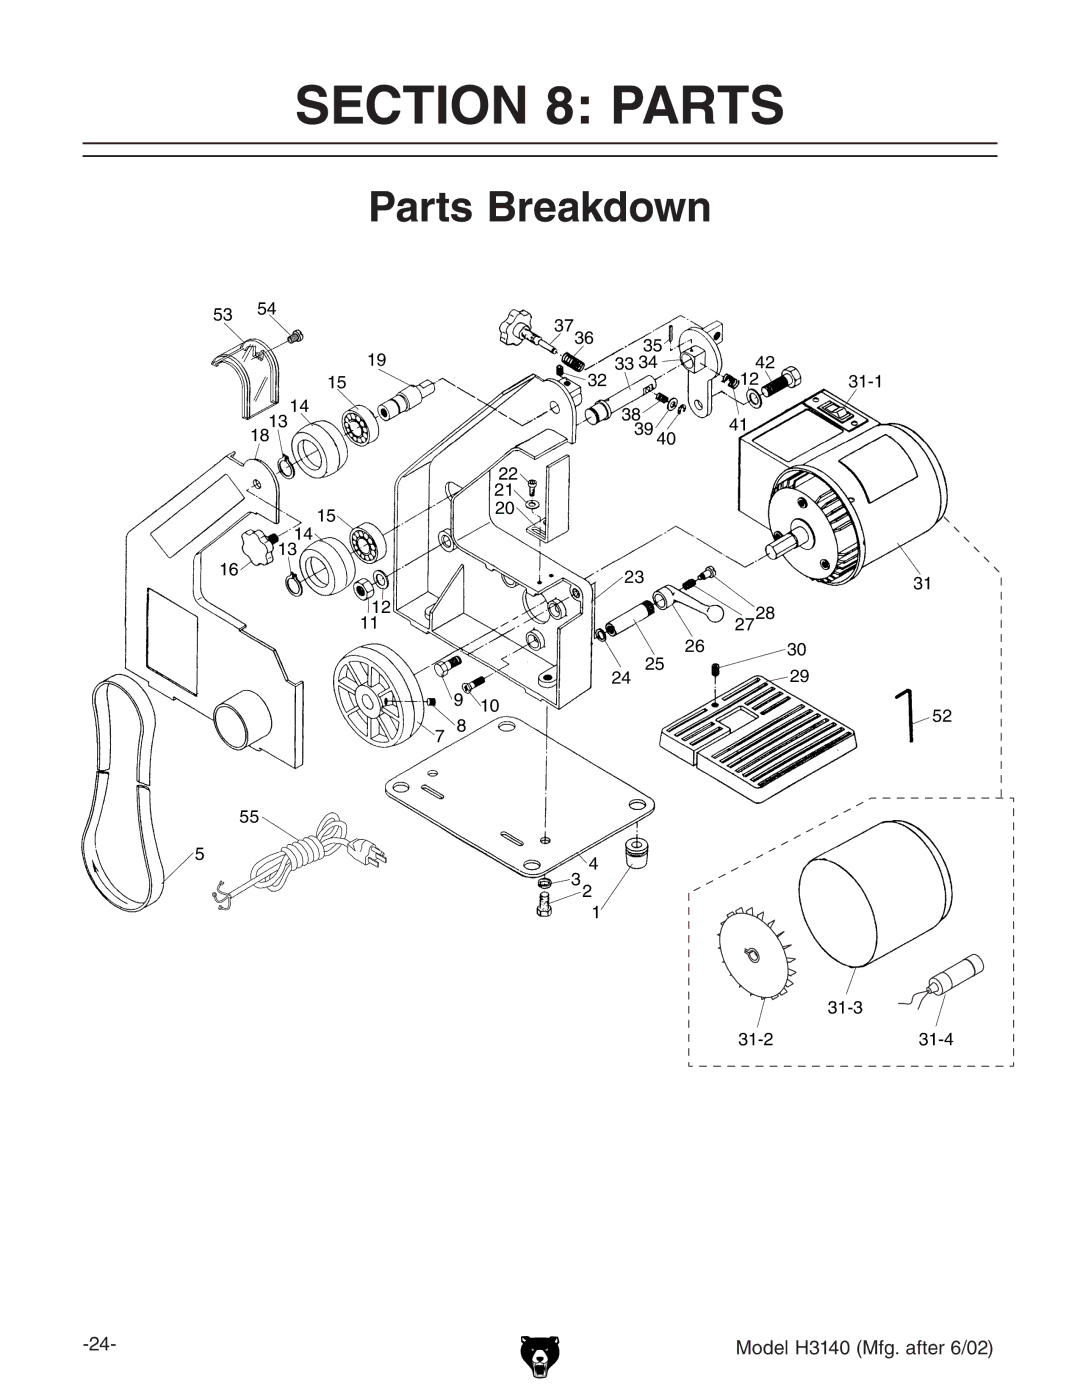 Grizzly H3140 owner manual Parts Breakdown 